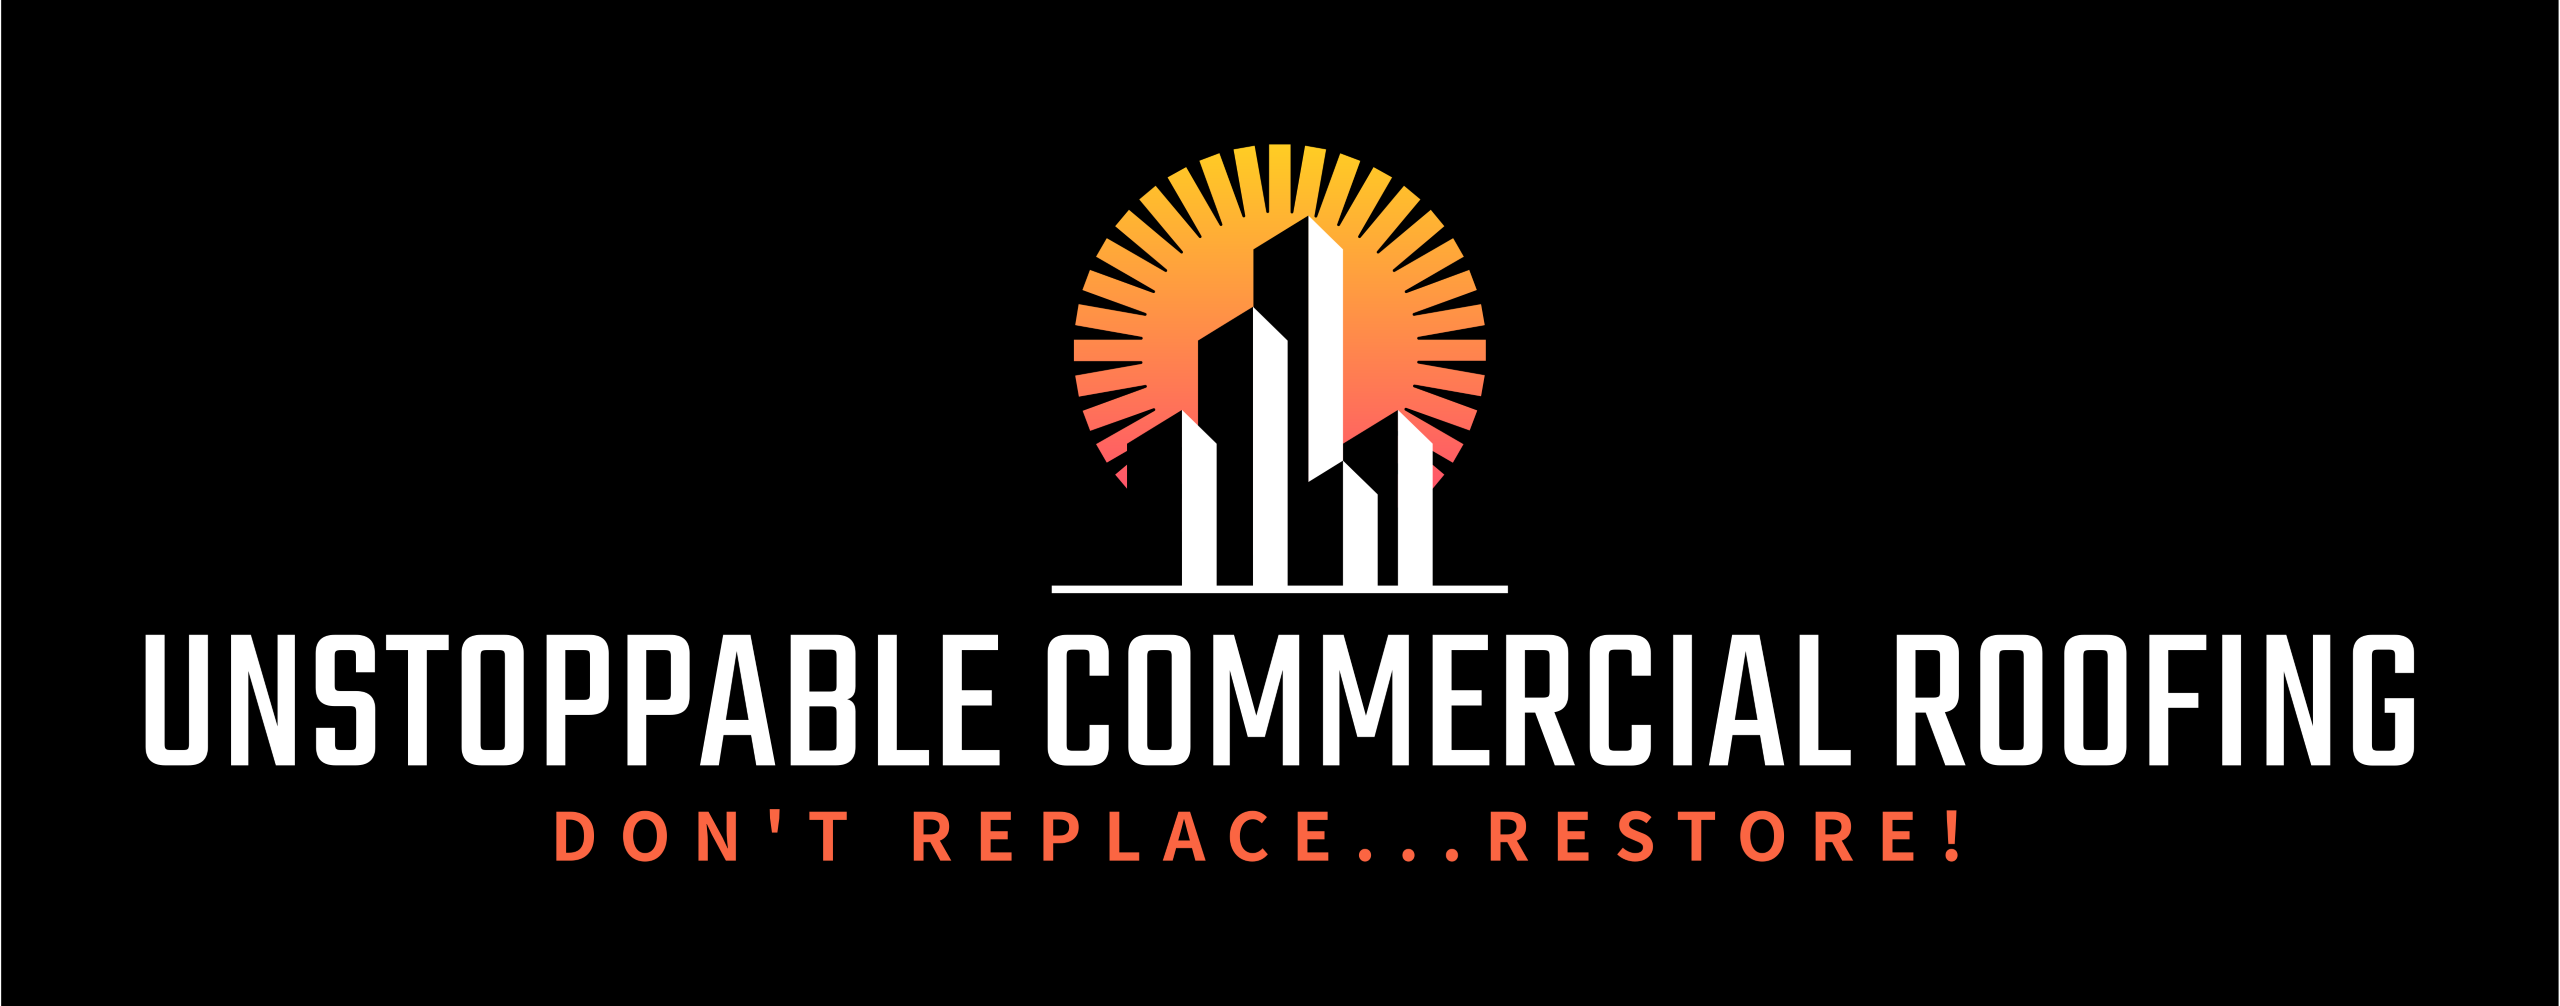 Unstoppable Commercial Roofing LLC Logo